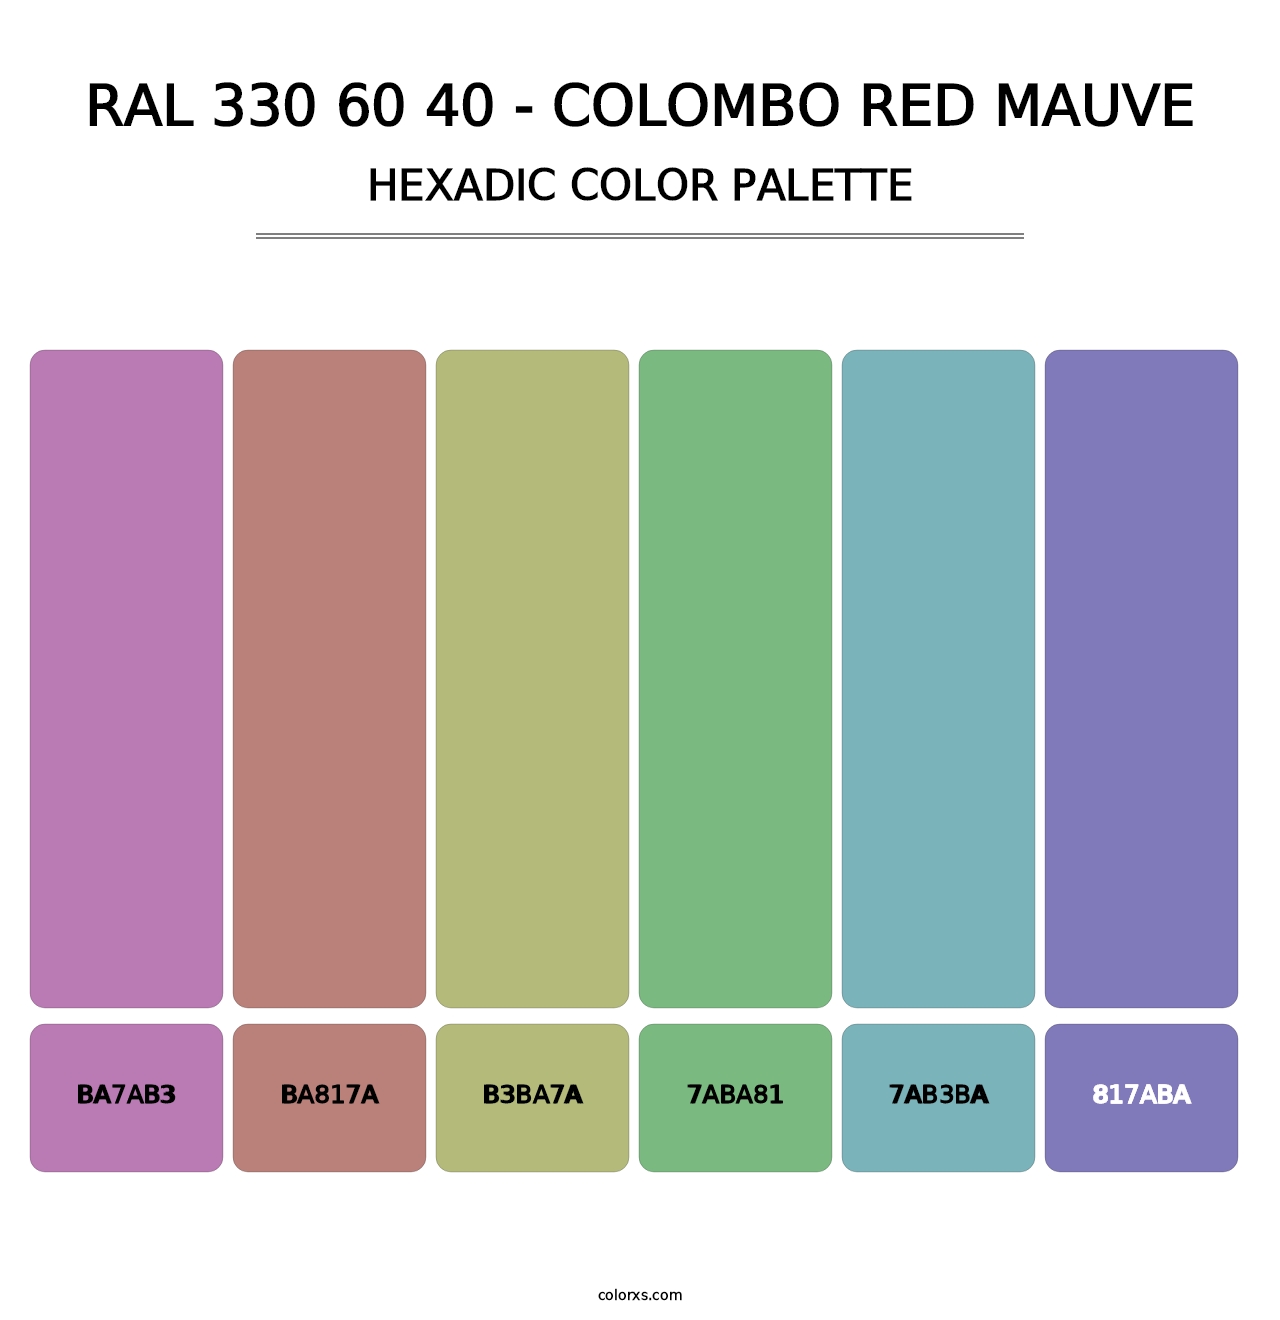 RAL 330 60 40 - Colombo Red Mauve - Hexadic Color Palette